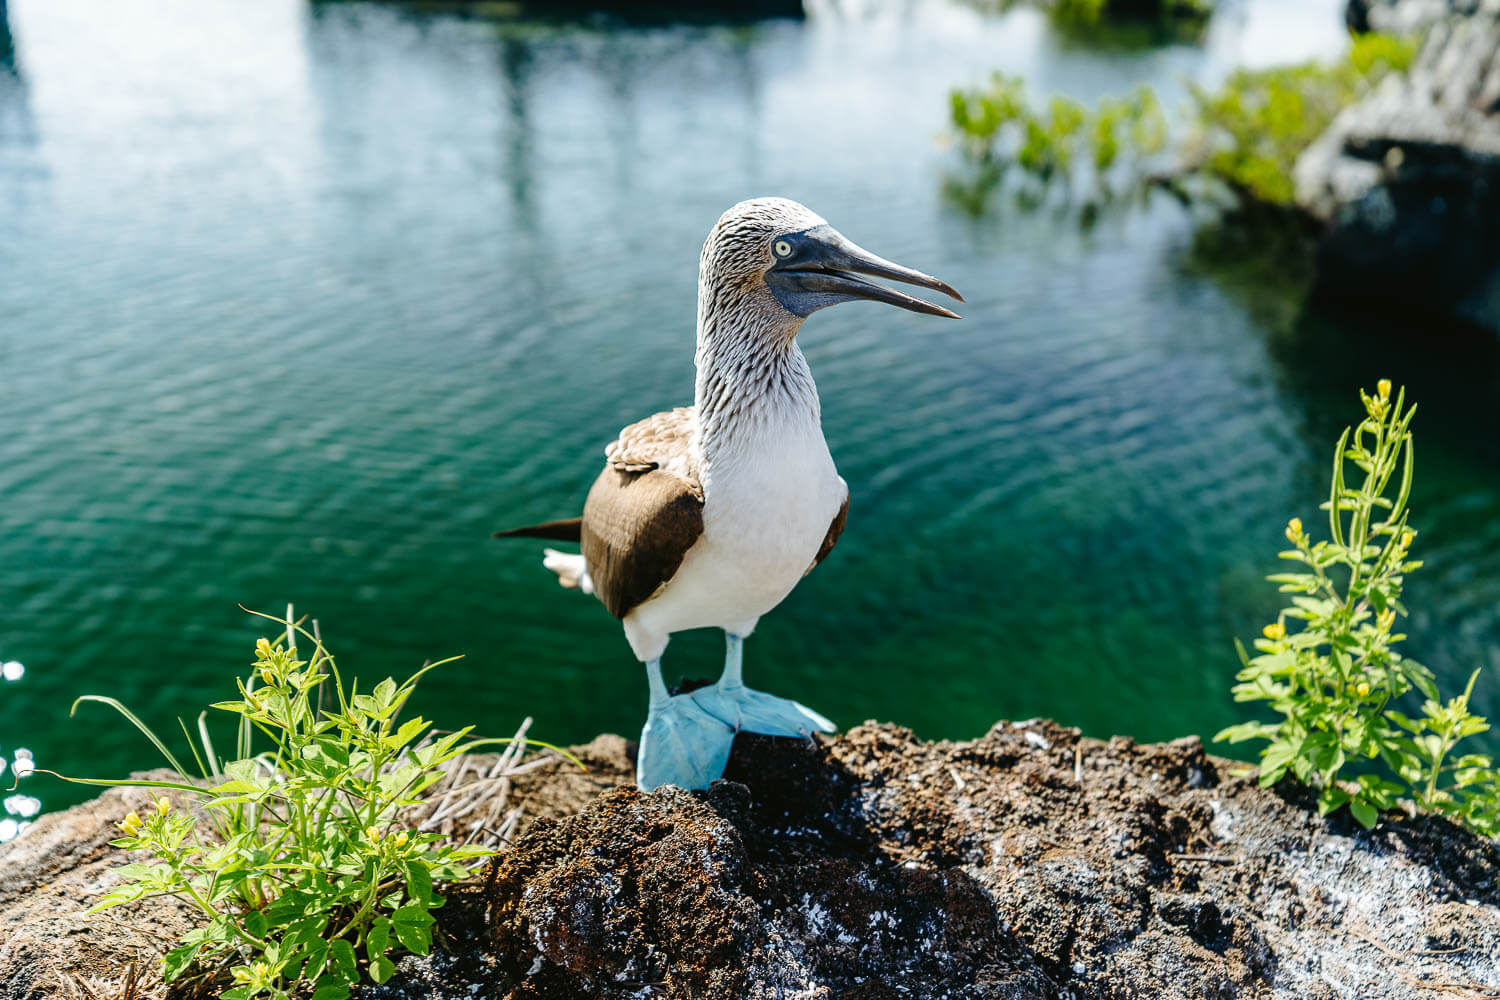 A blue-footed booby in Los Tuneles, Isabela, Galápagos